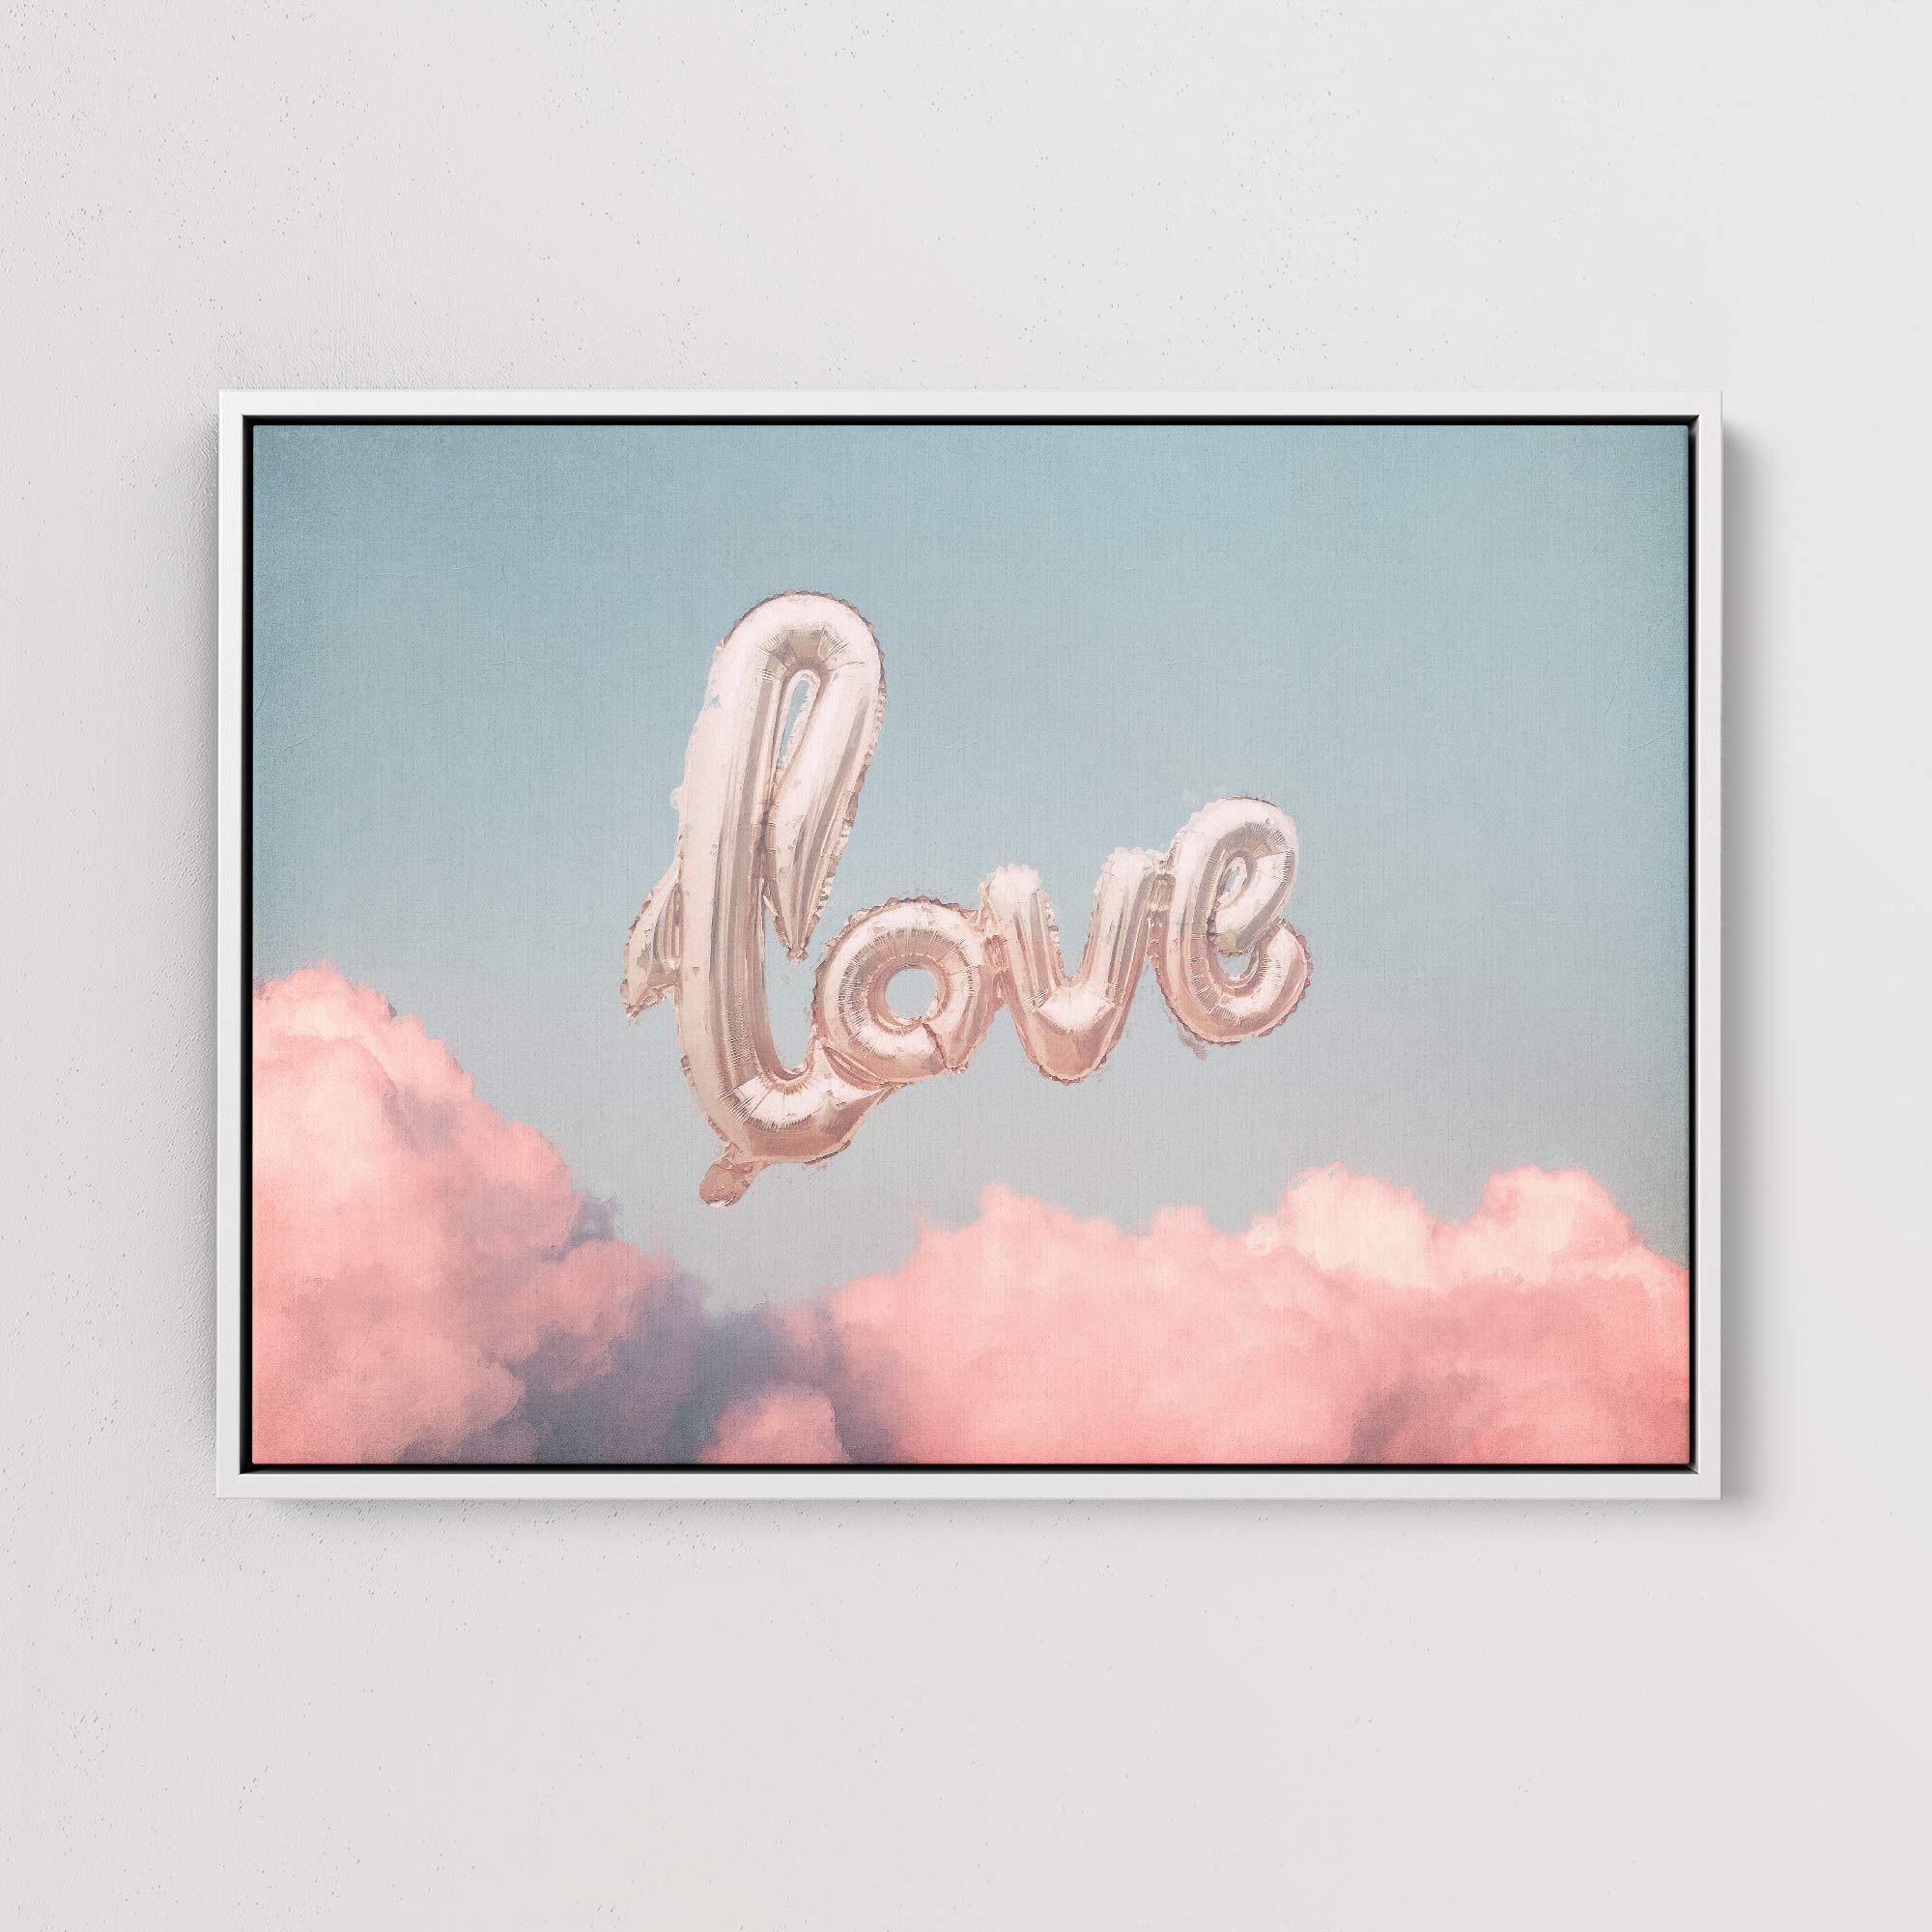 love is in the air print